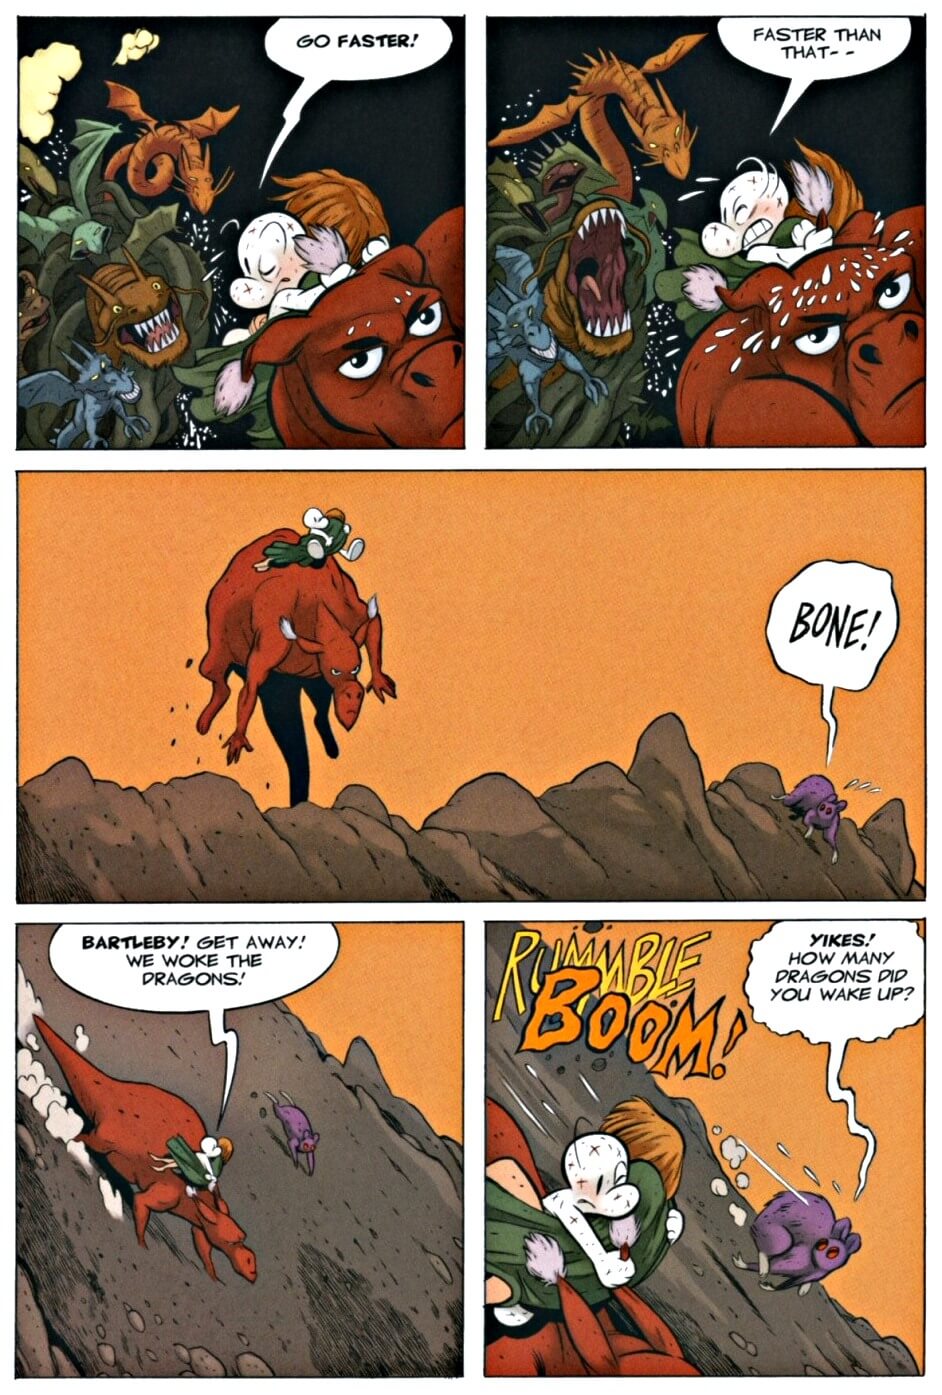 page 167 chapter 5 of bone 9 crown of horns graphic novel